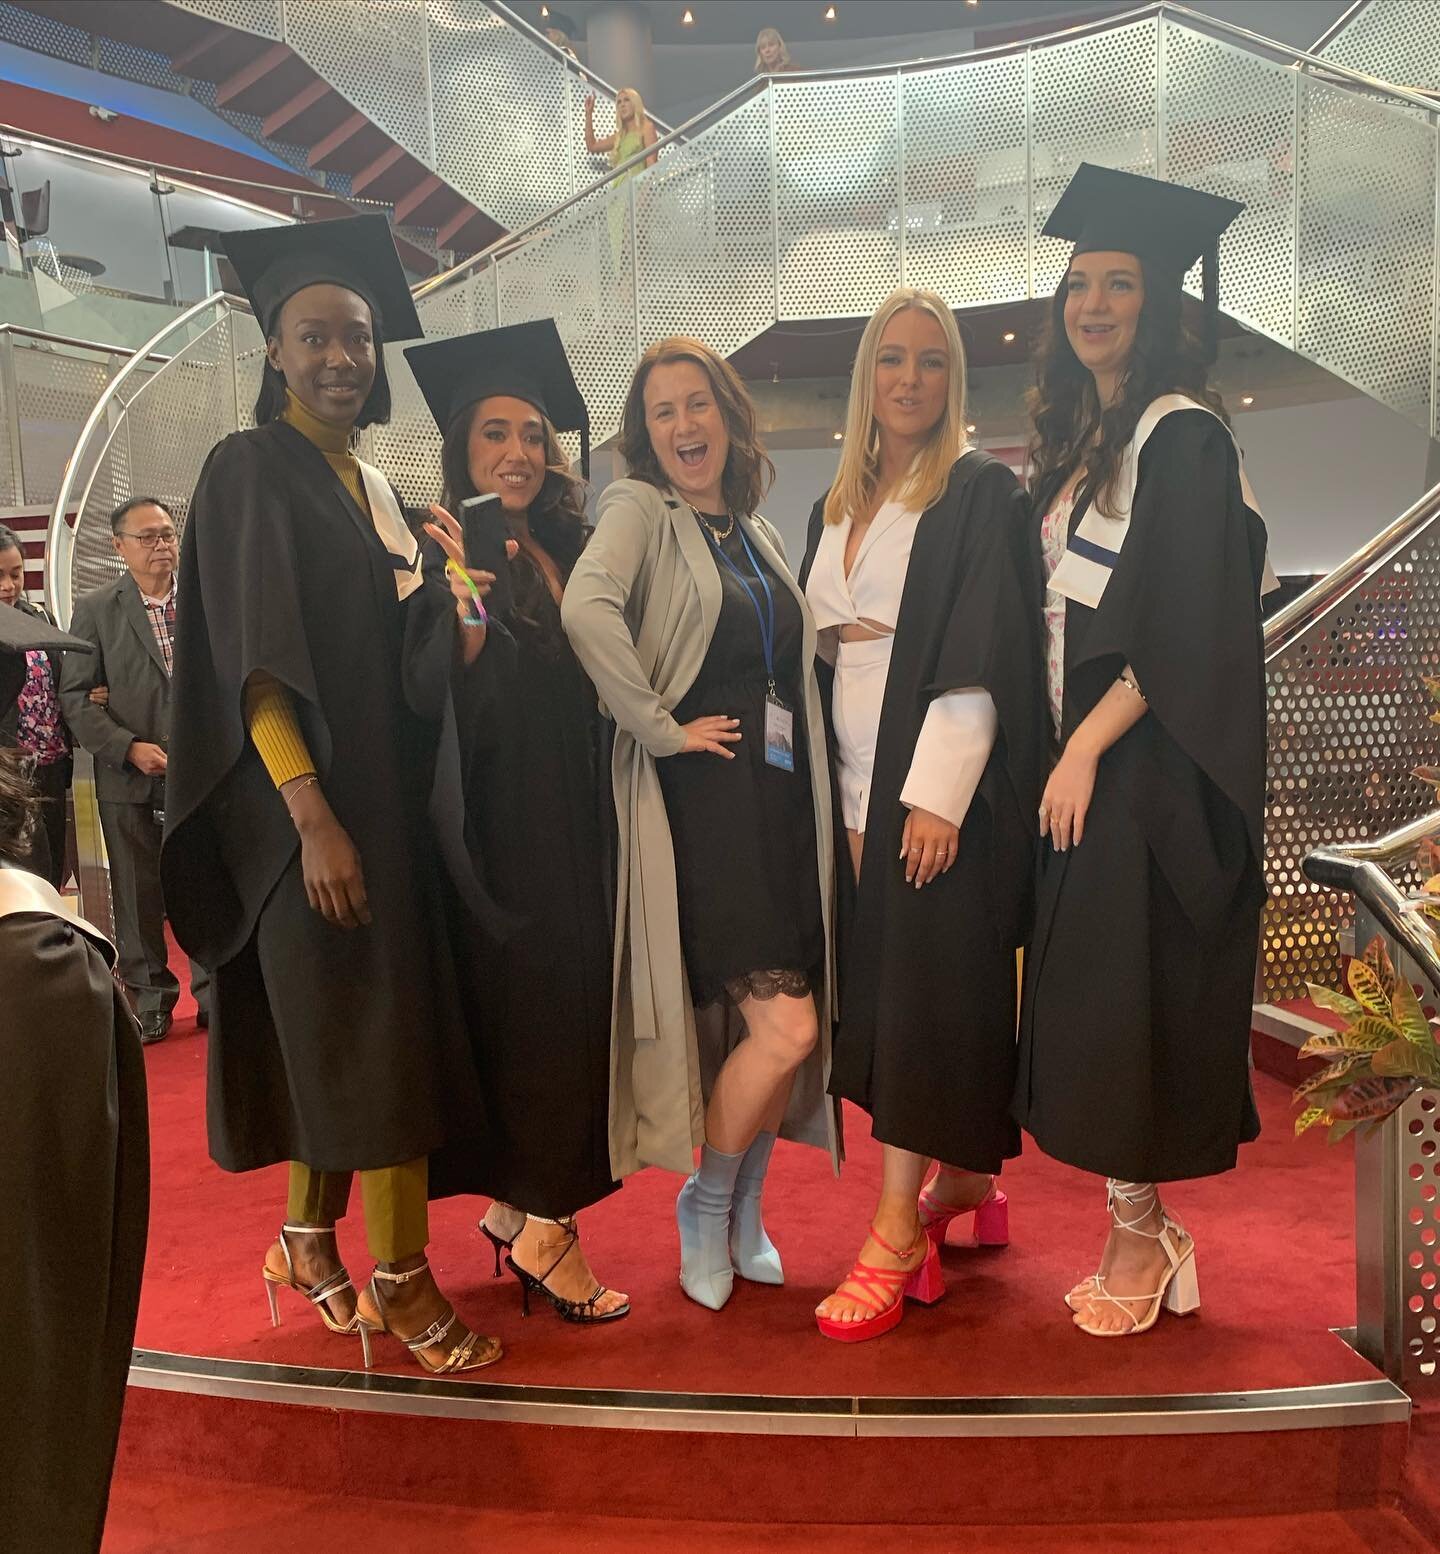 Graduation Day! 🧑&zwj;🎓🎉
So proud of this talented group&hellip; watch out world!

#fashionstylingcourse #vmlife #furthereducation #classof2022 #graduationday🎓